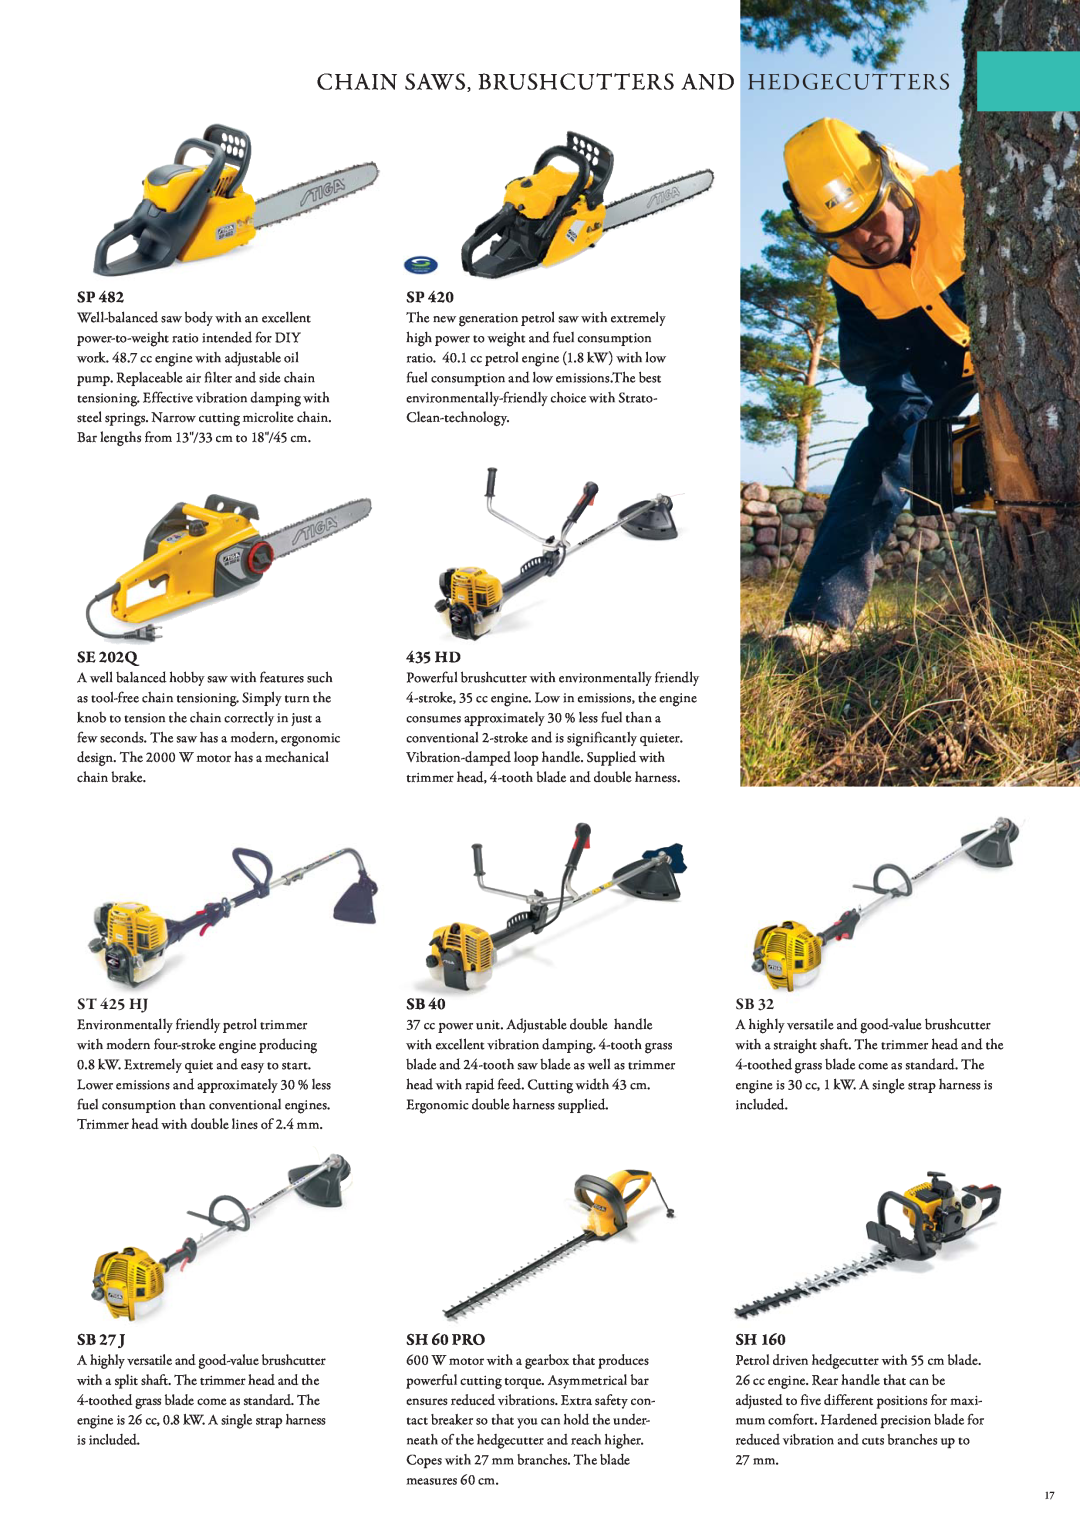 Stiga Snow Throwers manual Chain Saws, Brushcutters And Hedgecutters, SE 202Q, 435 HD, ST 425 HJ, SB 27 J, SH 60 PRO 